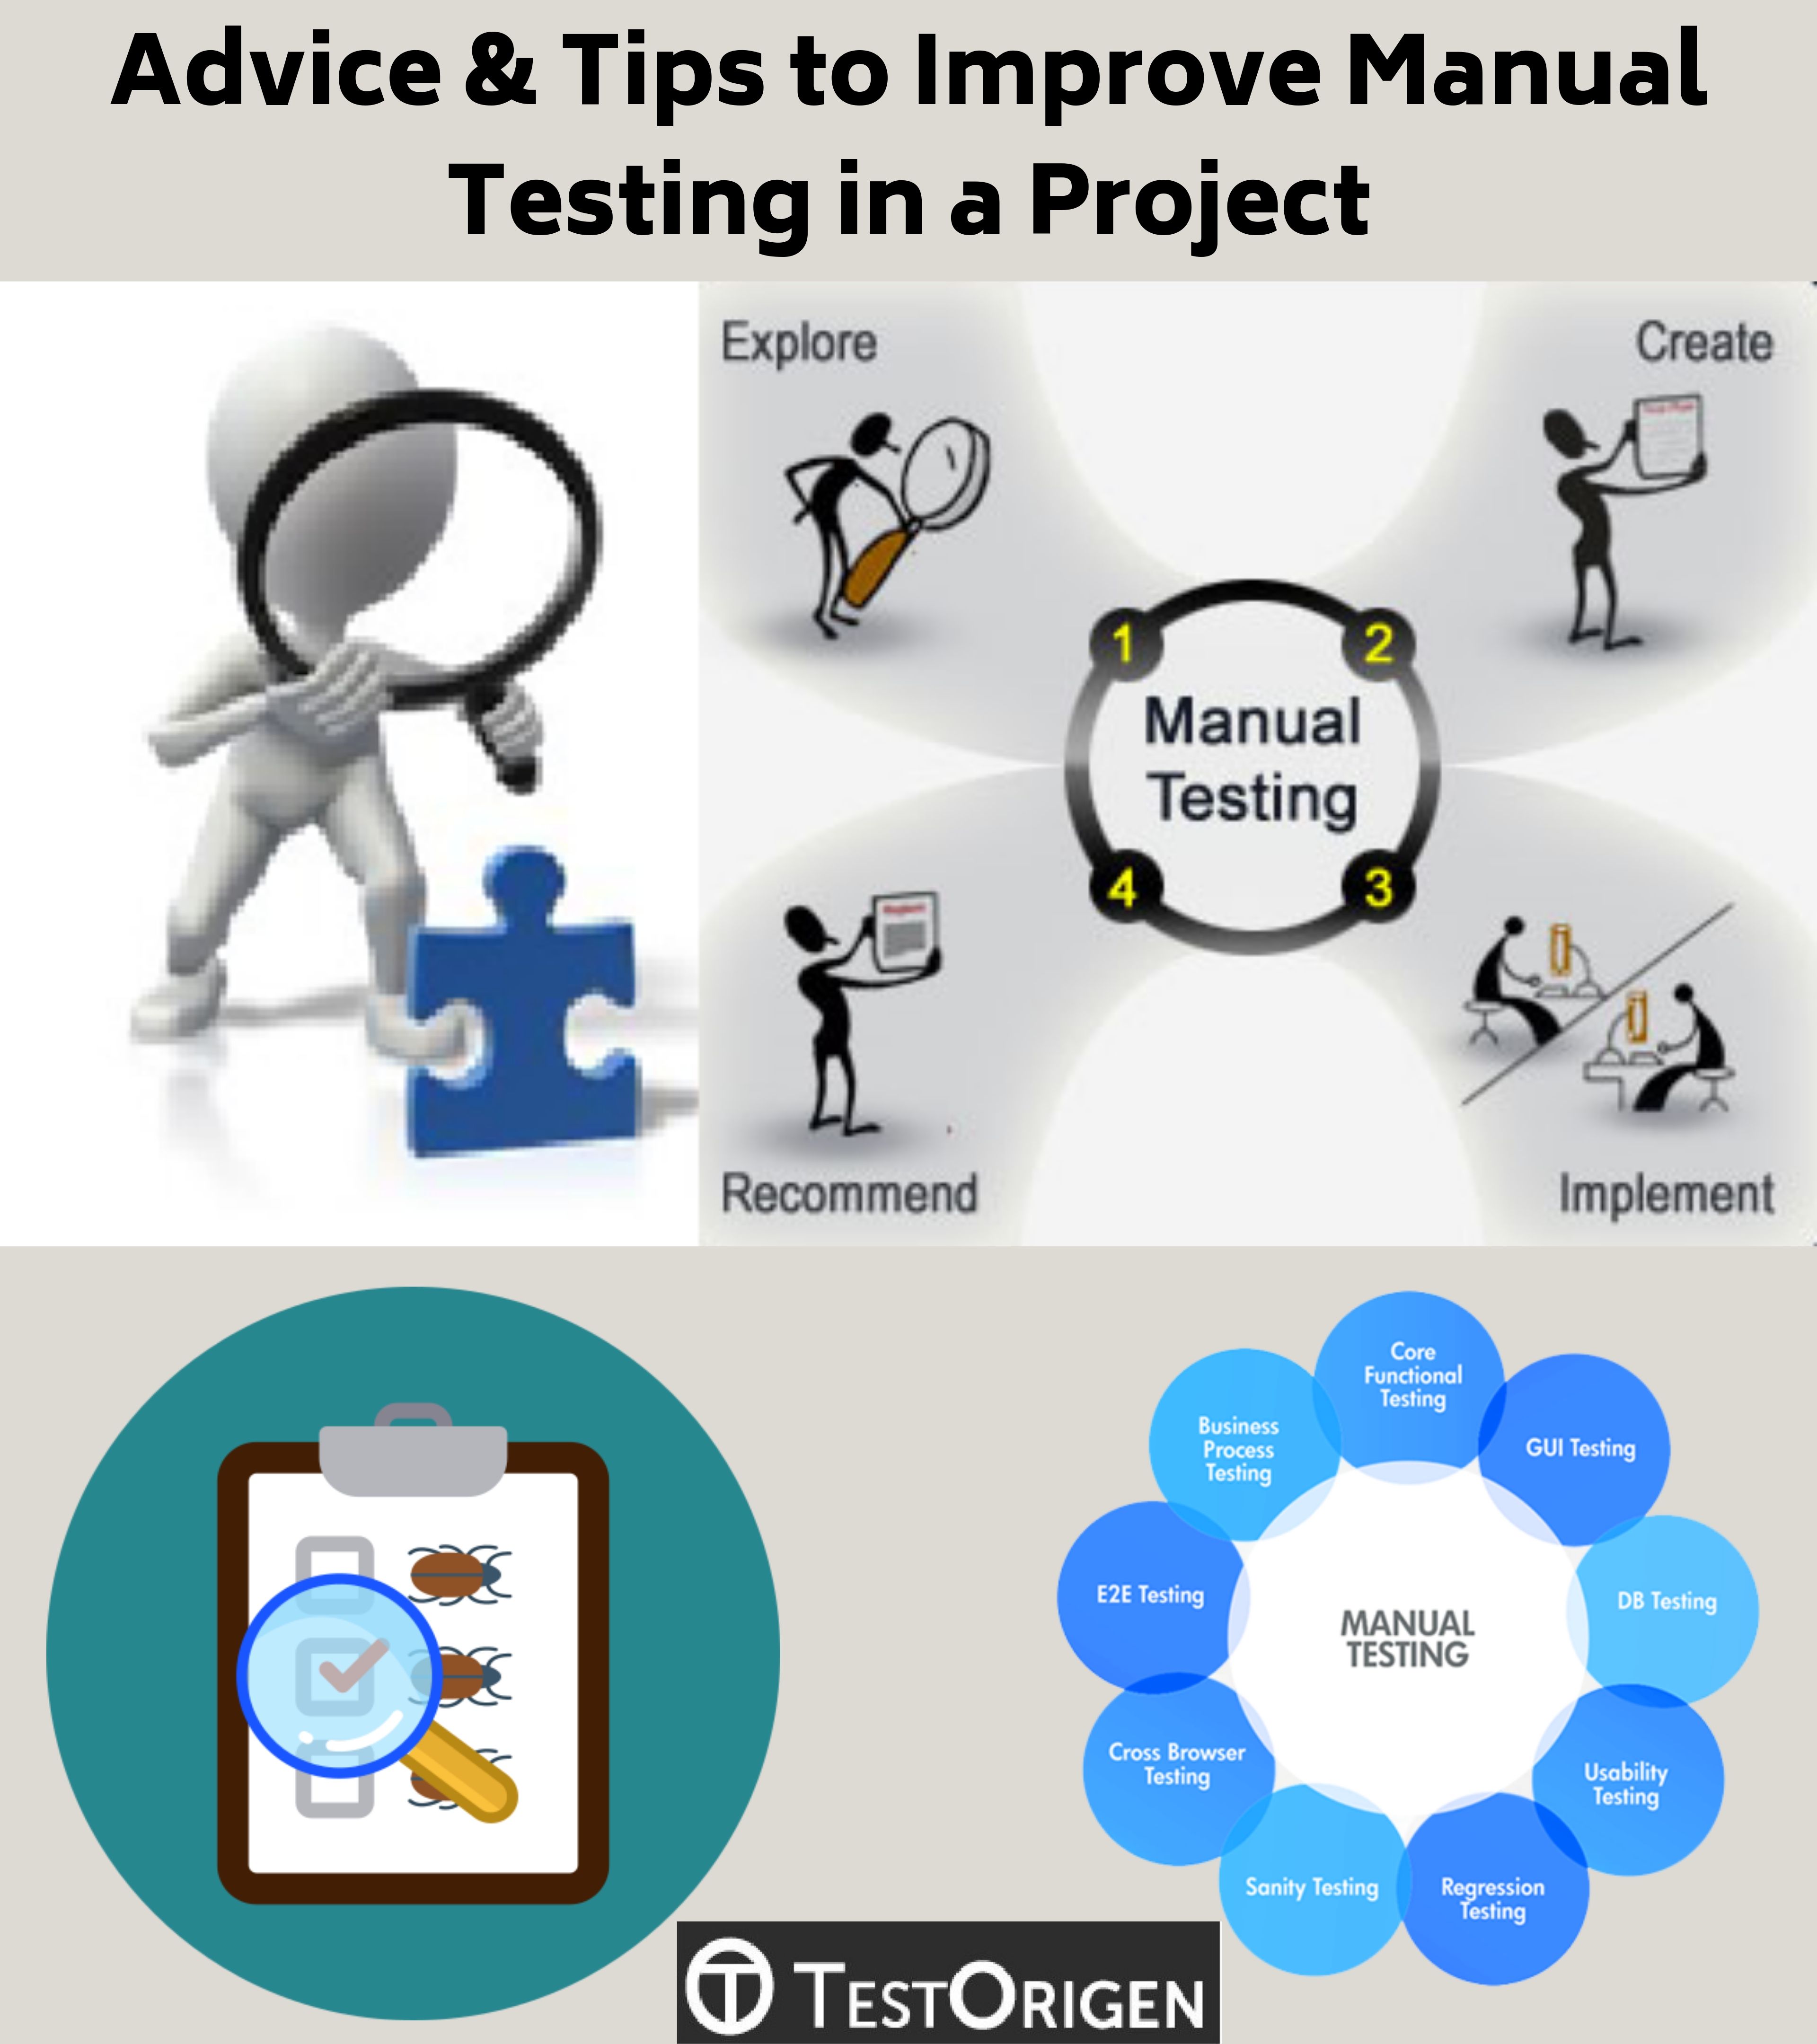 Advice & Tips to Improve Manual Testing in a Project